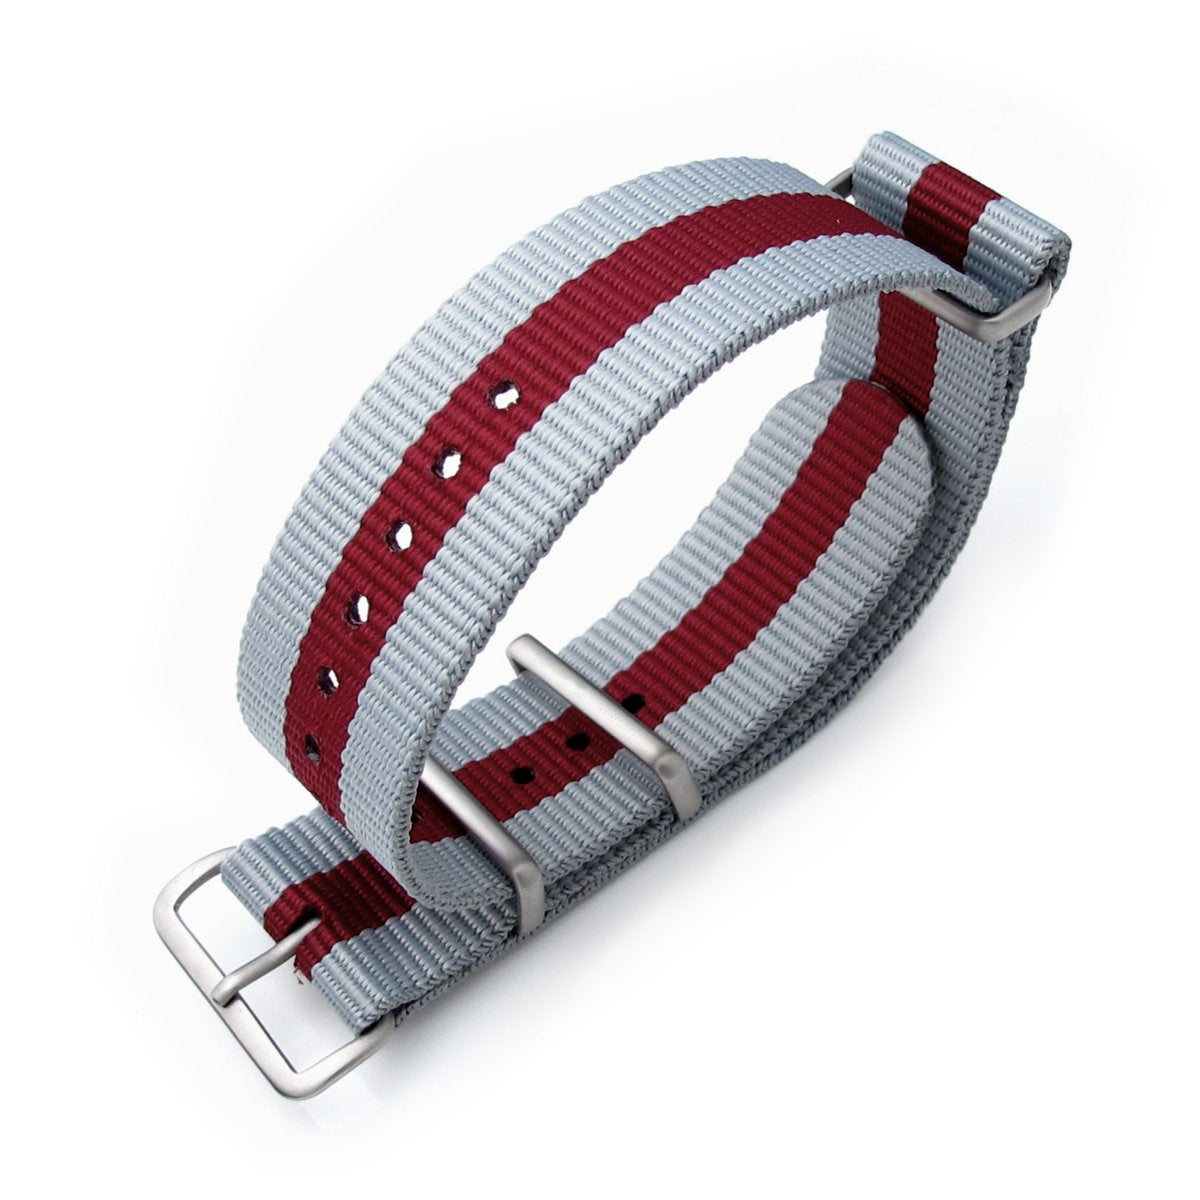 MiLTAT 20mm or 22mm G10 NATO Military Watch Strap Ballistic Nylon Armband Brushed Grey &amp; Burgundy Red Strapcode Watch Bands